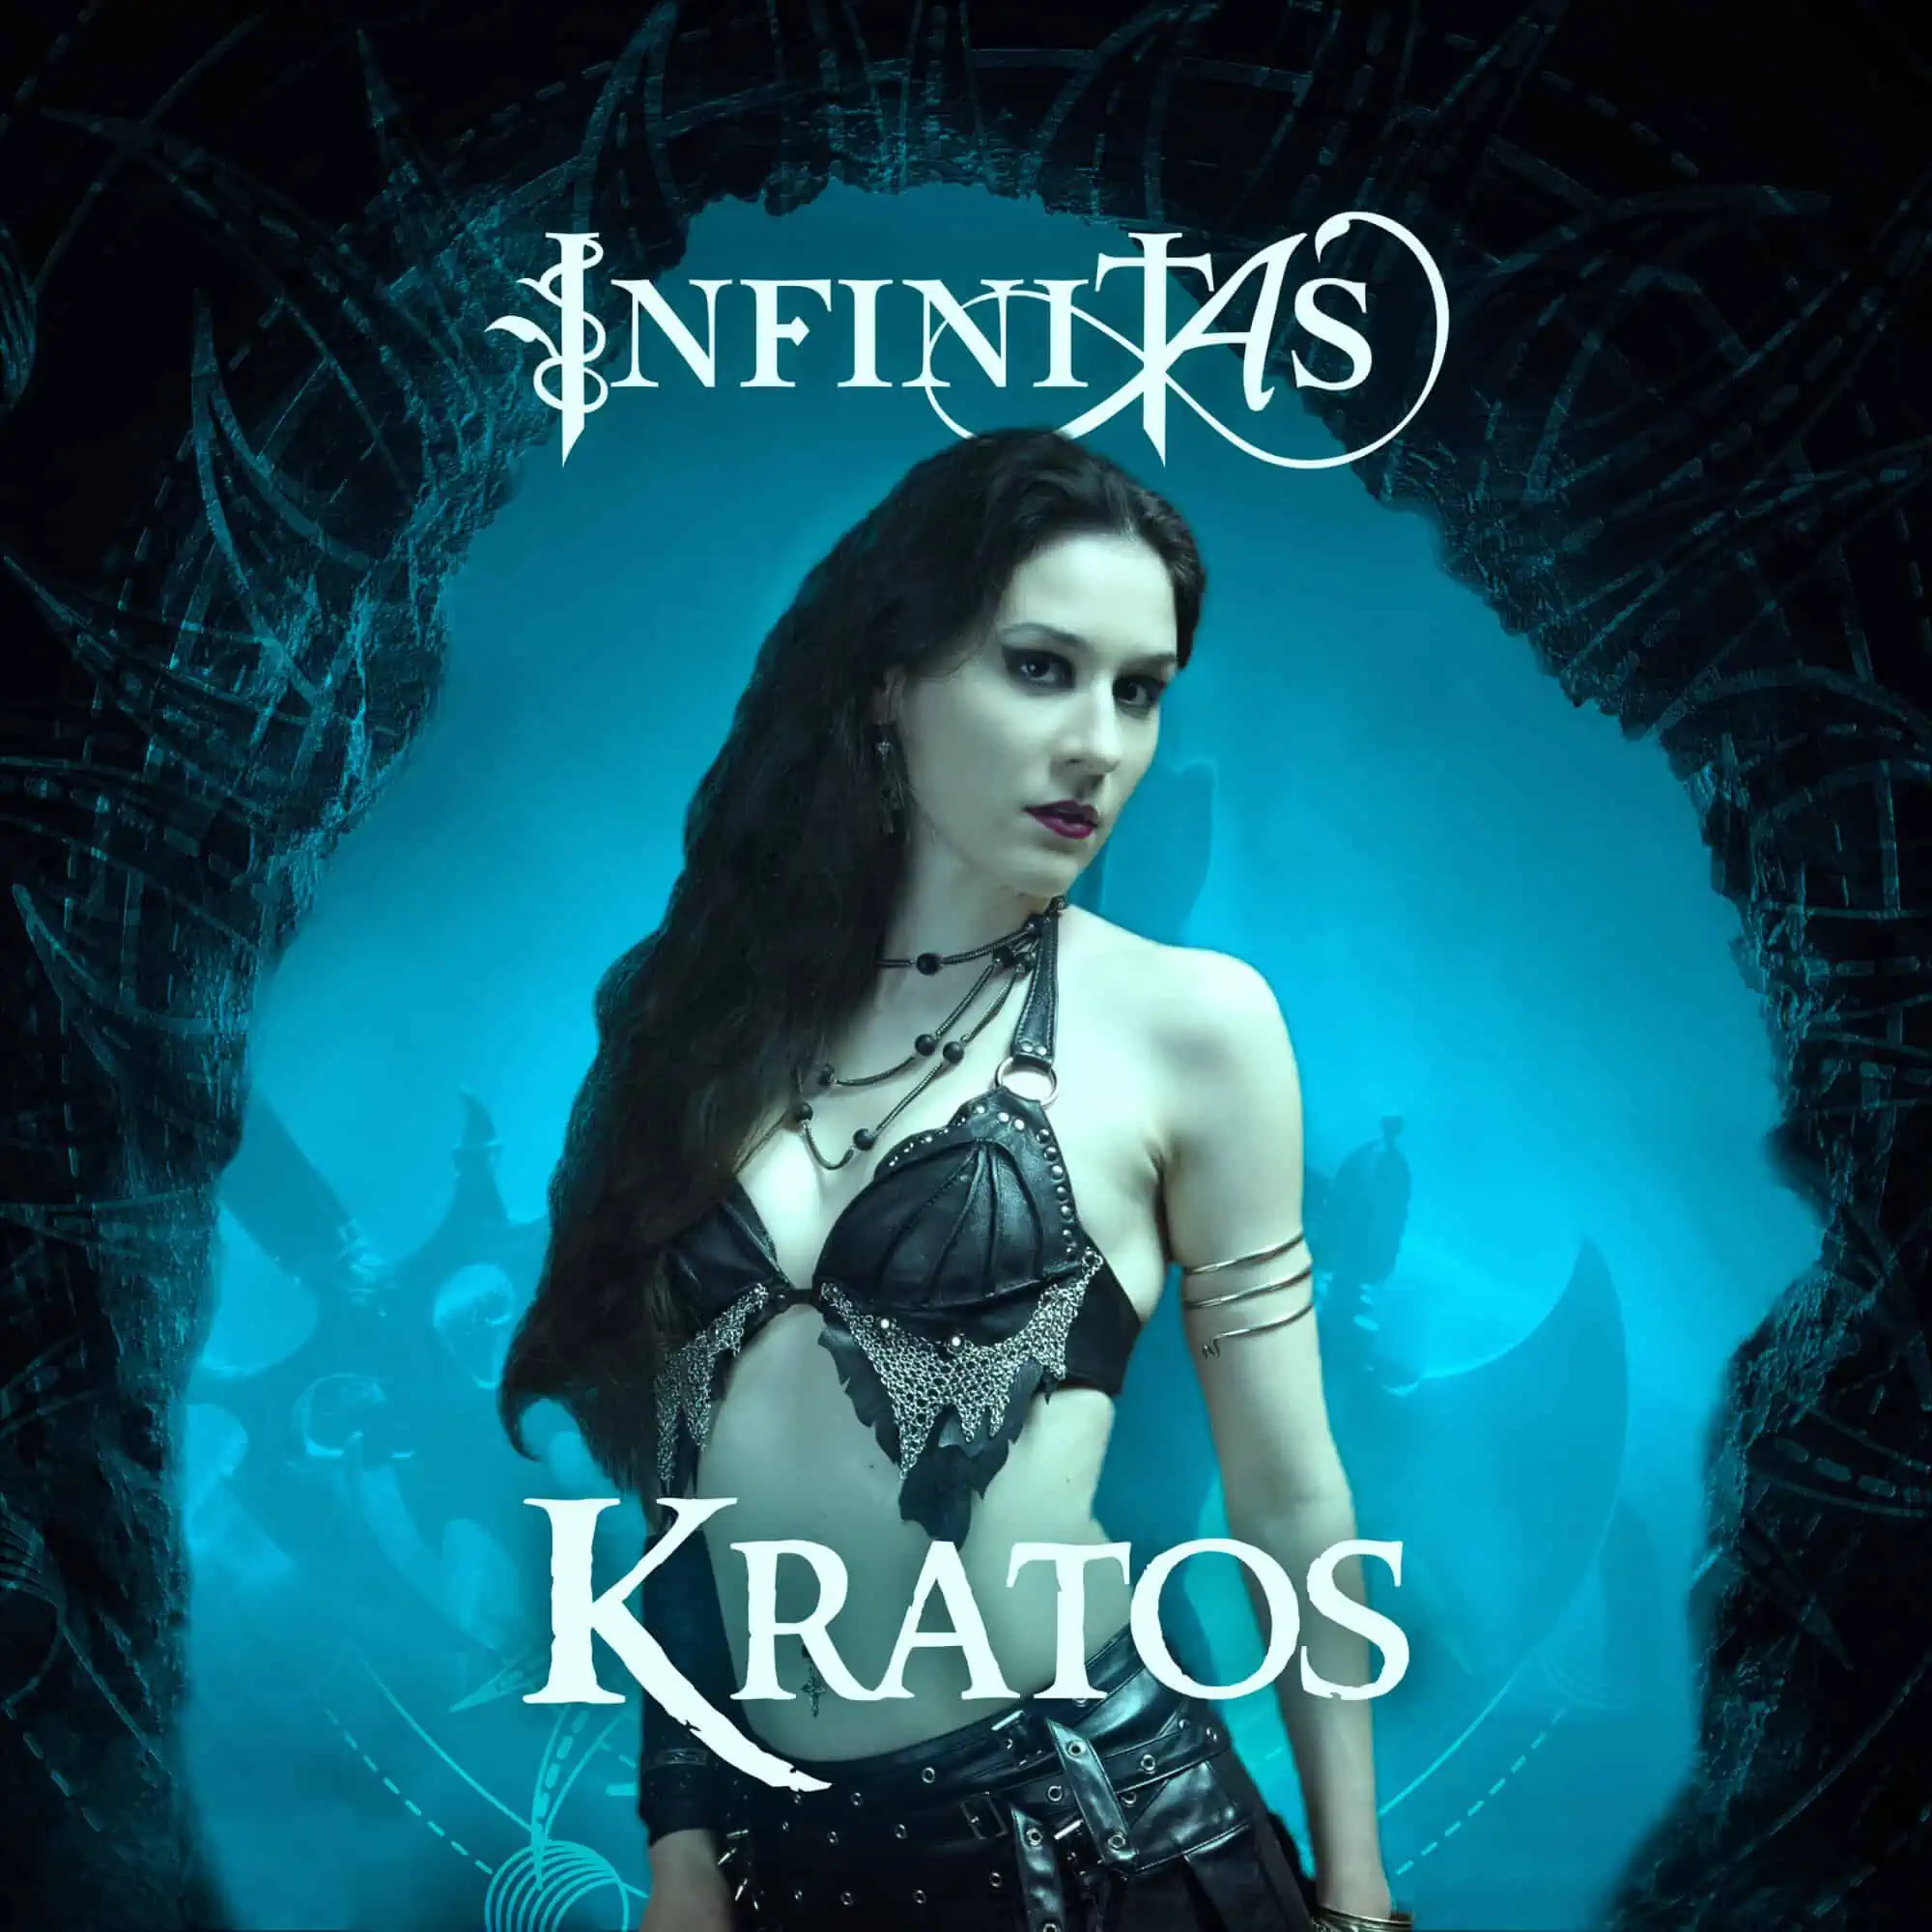 KRATOS Is Back with a Twist on Sept. 26th!